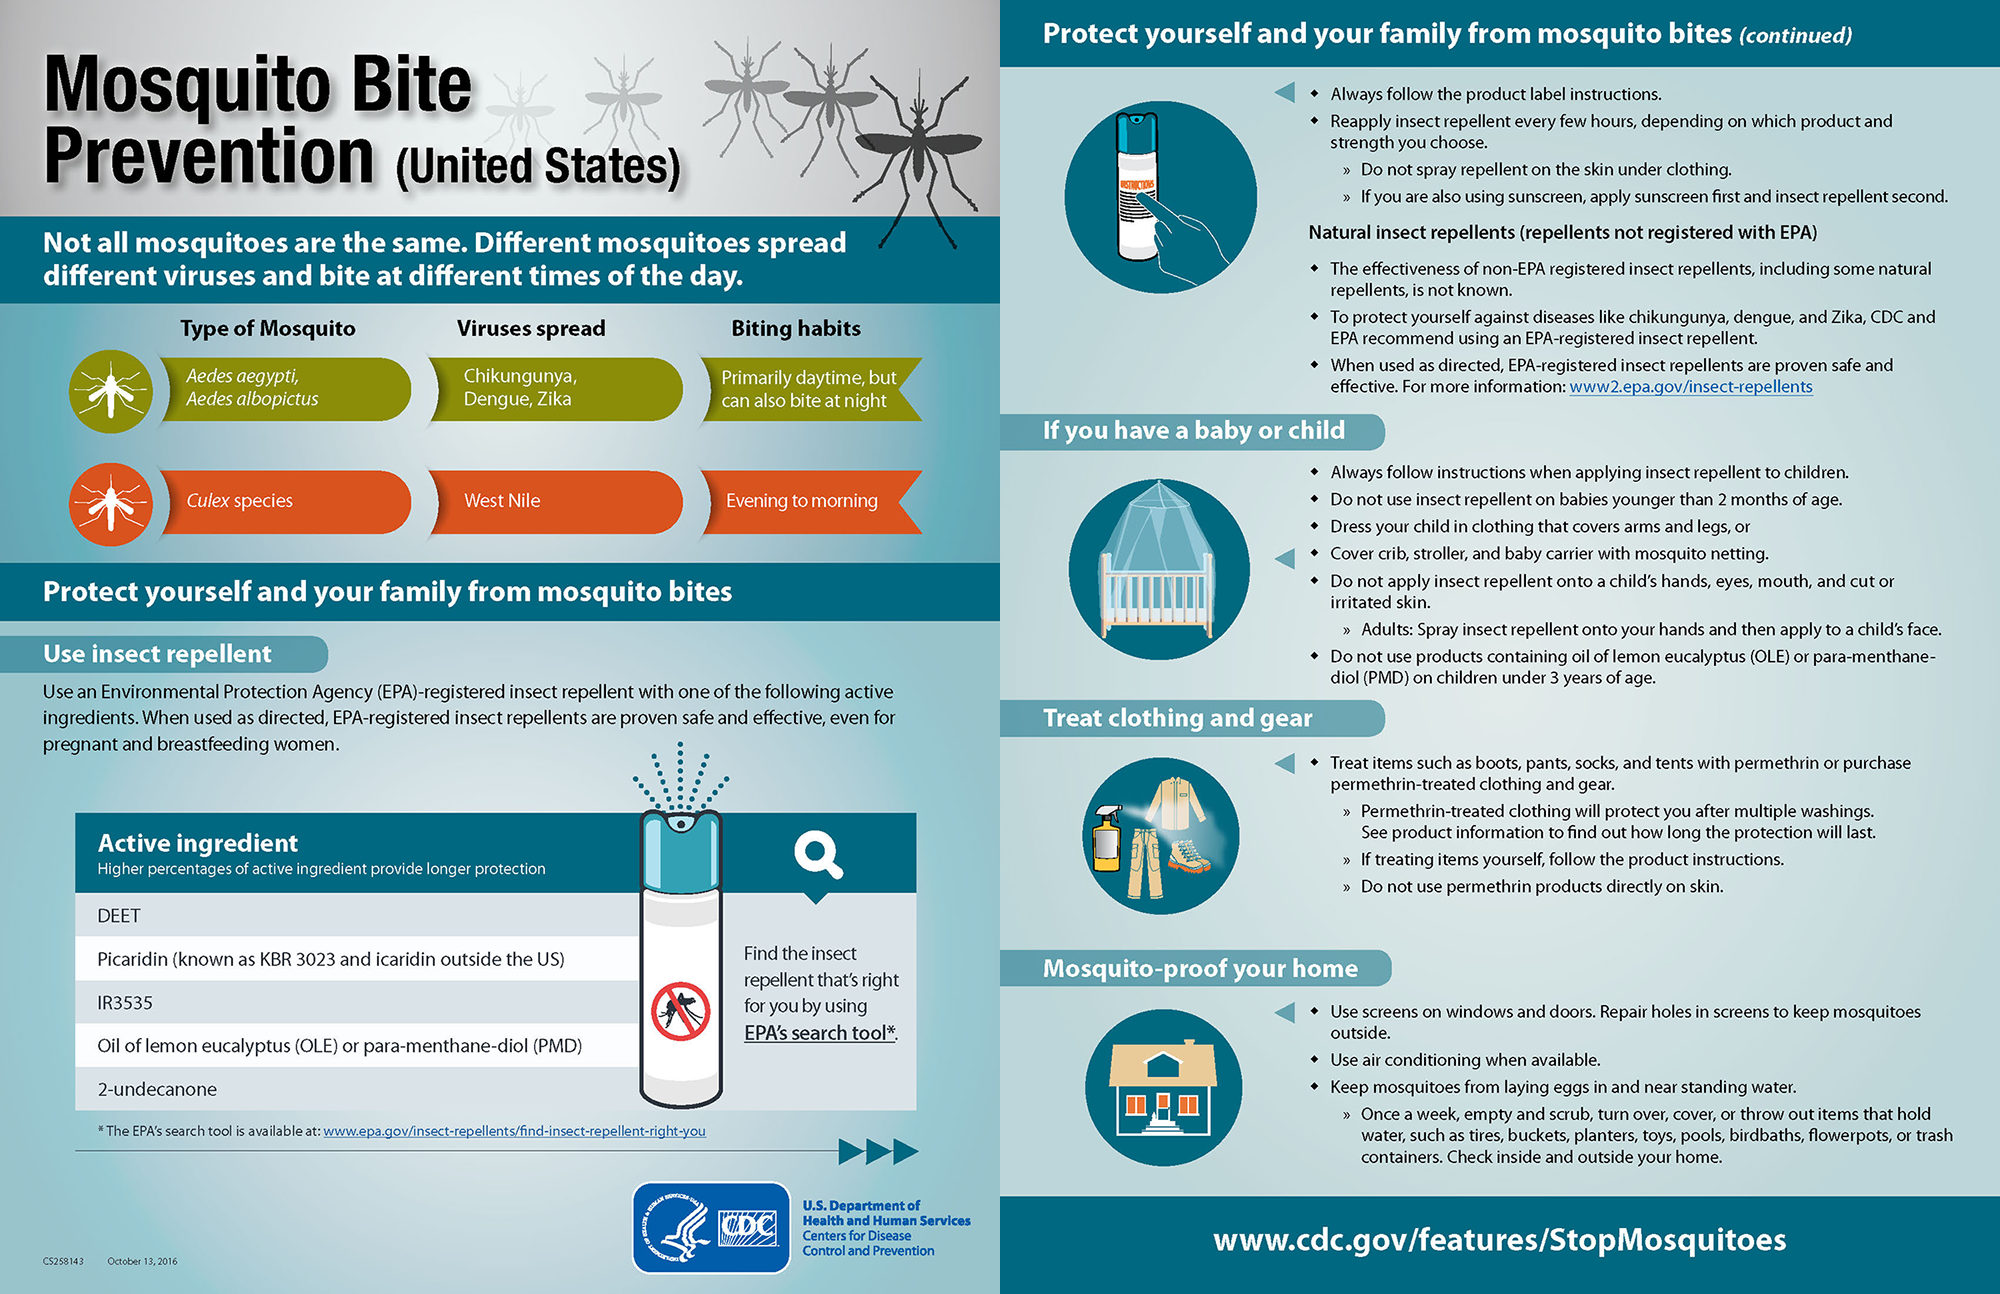 A U.S. Centers for Disease Control and Prevention graphic depicts how to protect yourself from mosquito bites.